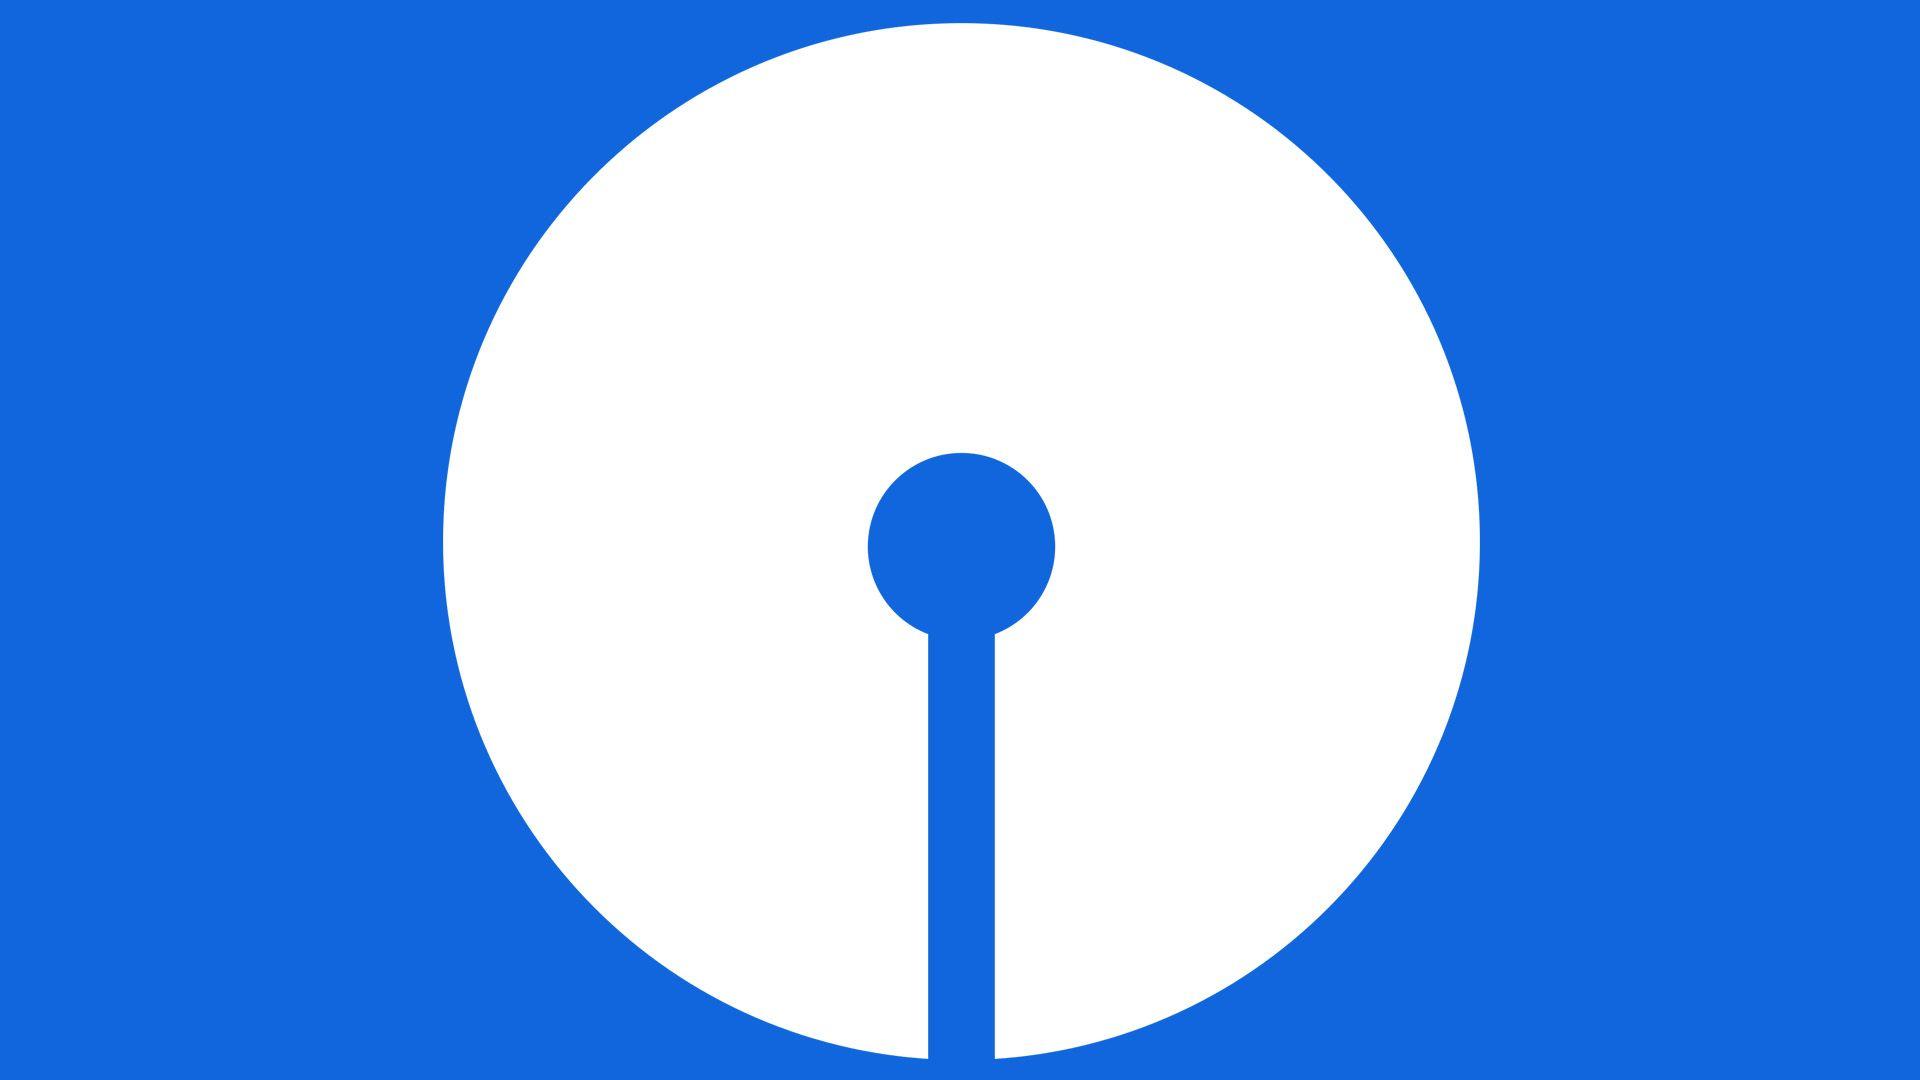 SBI Logo - Meaning State Bank of India logo and symbol | history and evolution